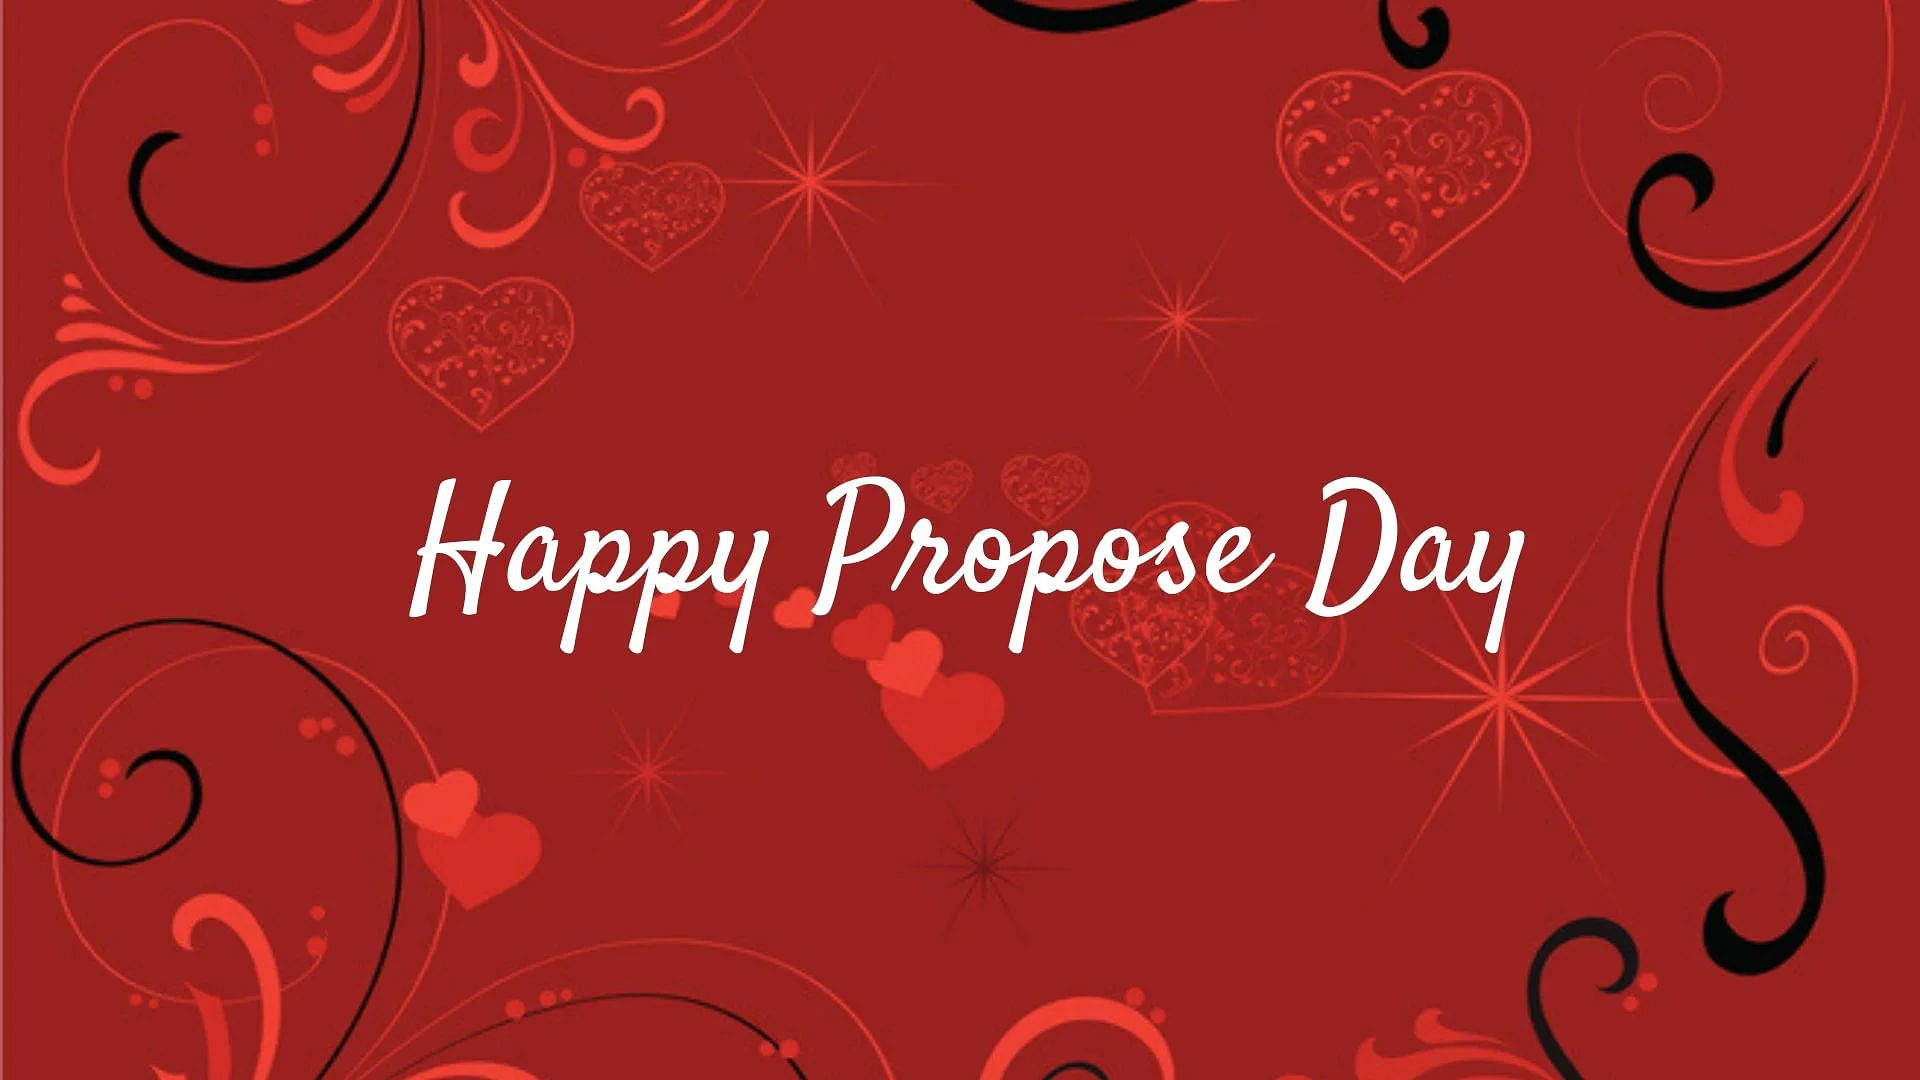 Happy Propose Day wishes, quotes, images, cards and greetings in English and Hindi